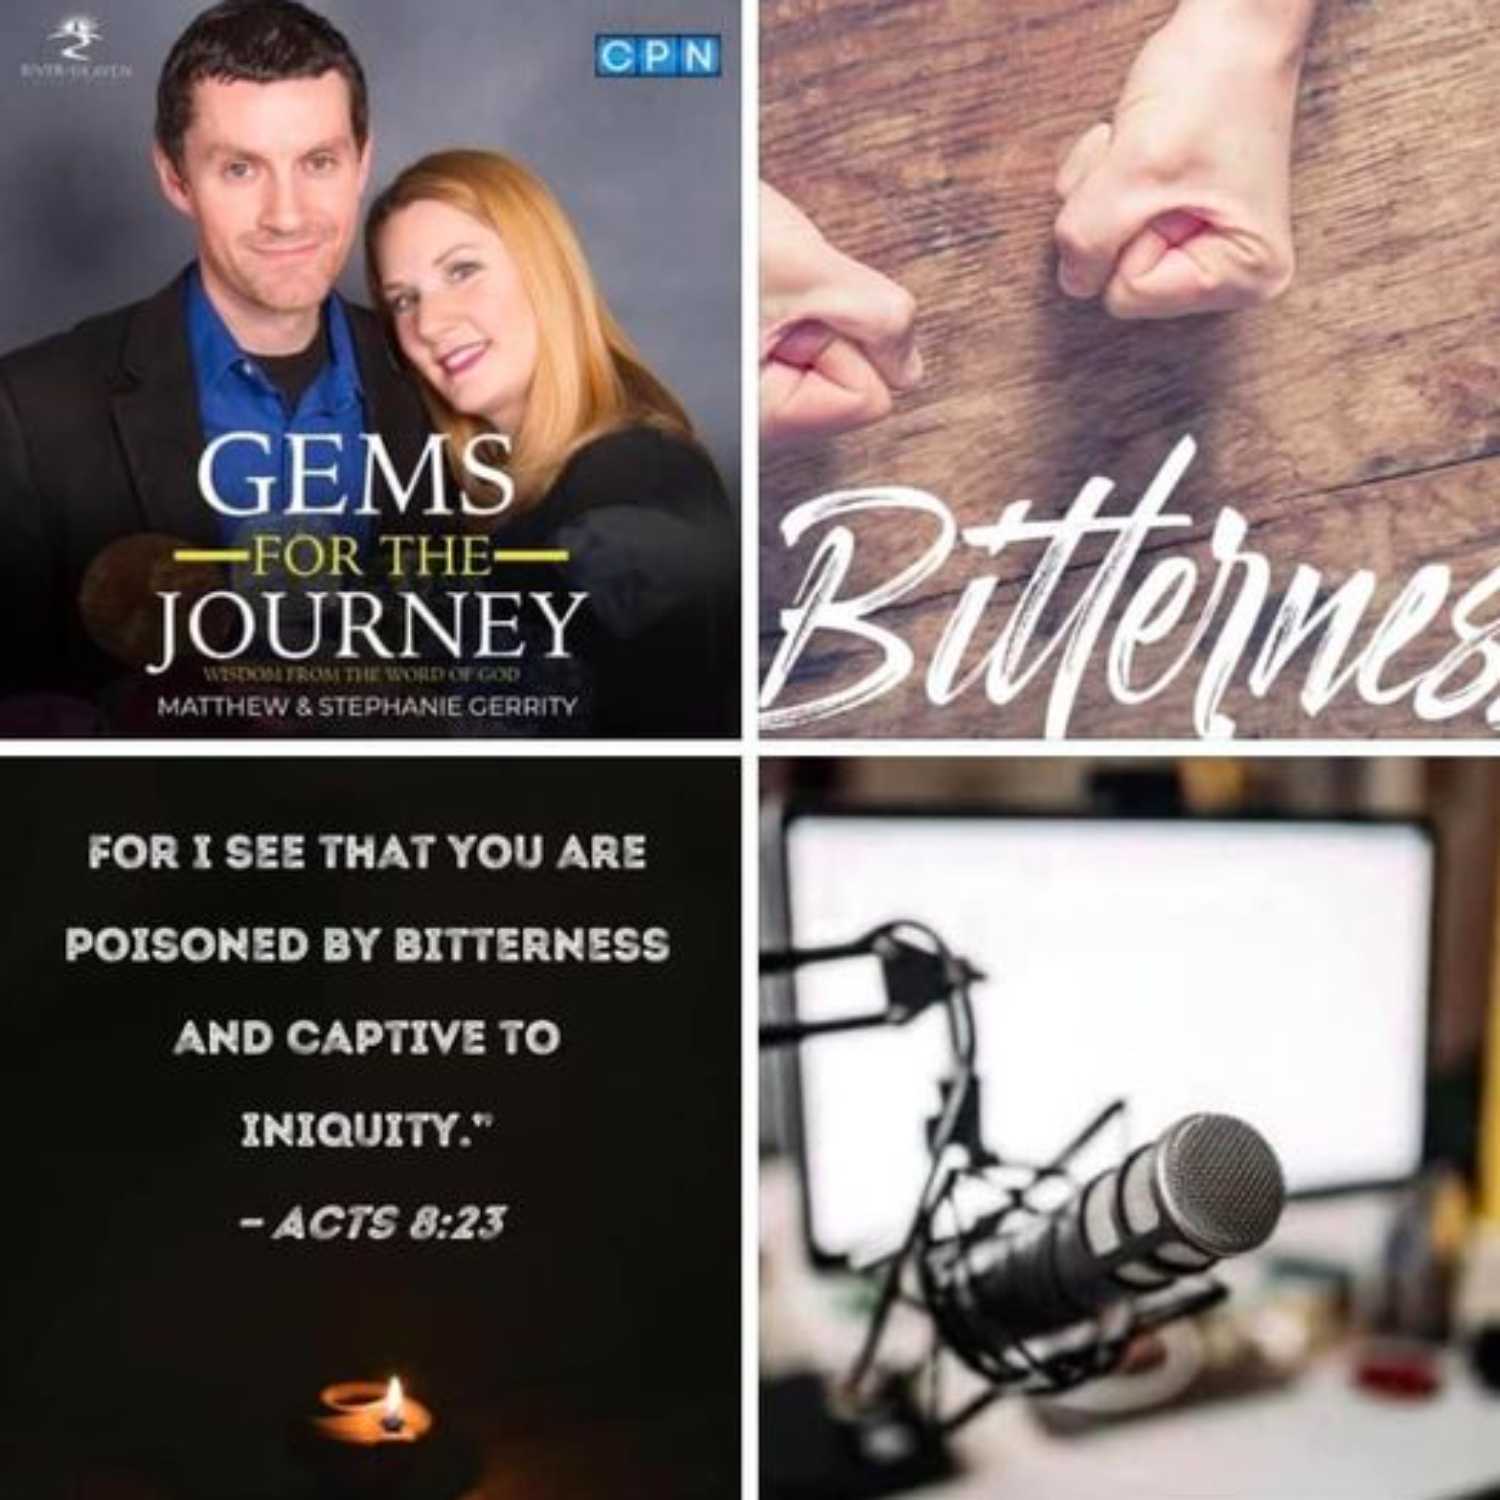 Gems For The Journey with Matthew and Stephanie Gerrity